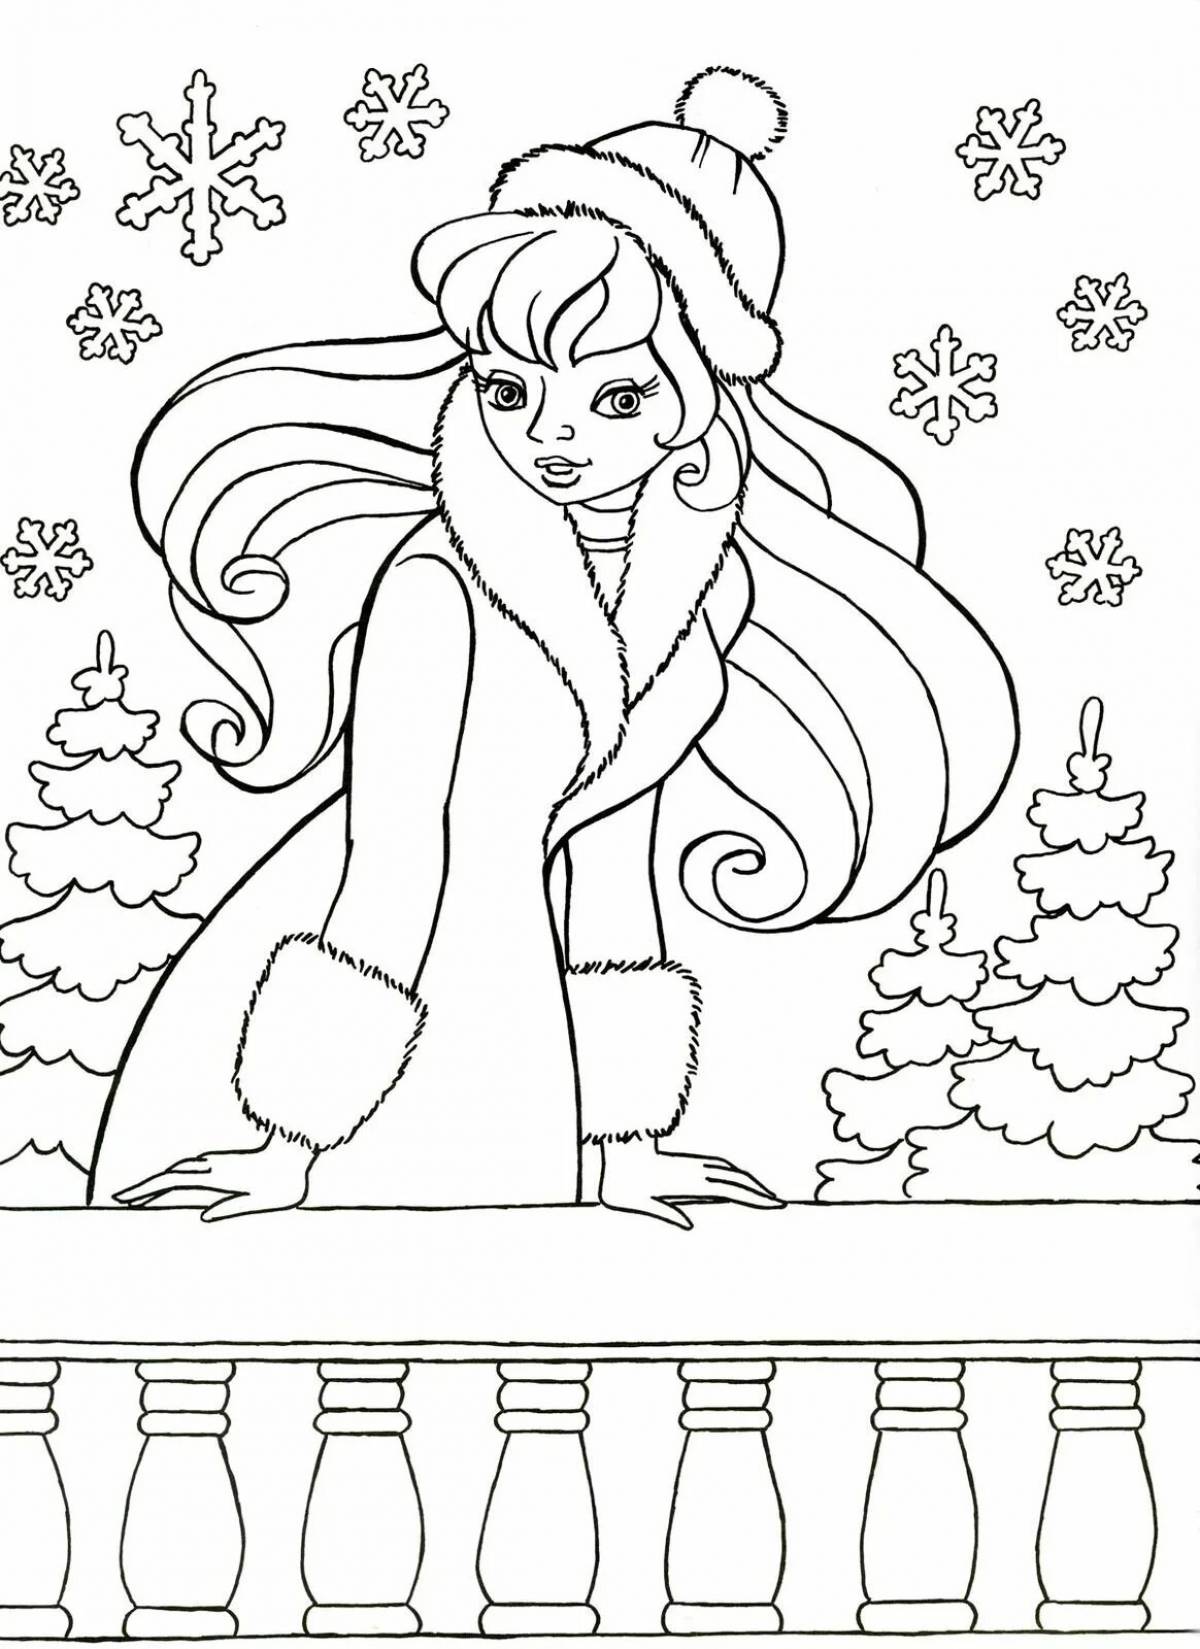 Magic Christmas coloring book for girls 8 years old